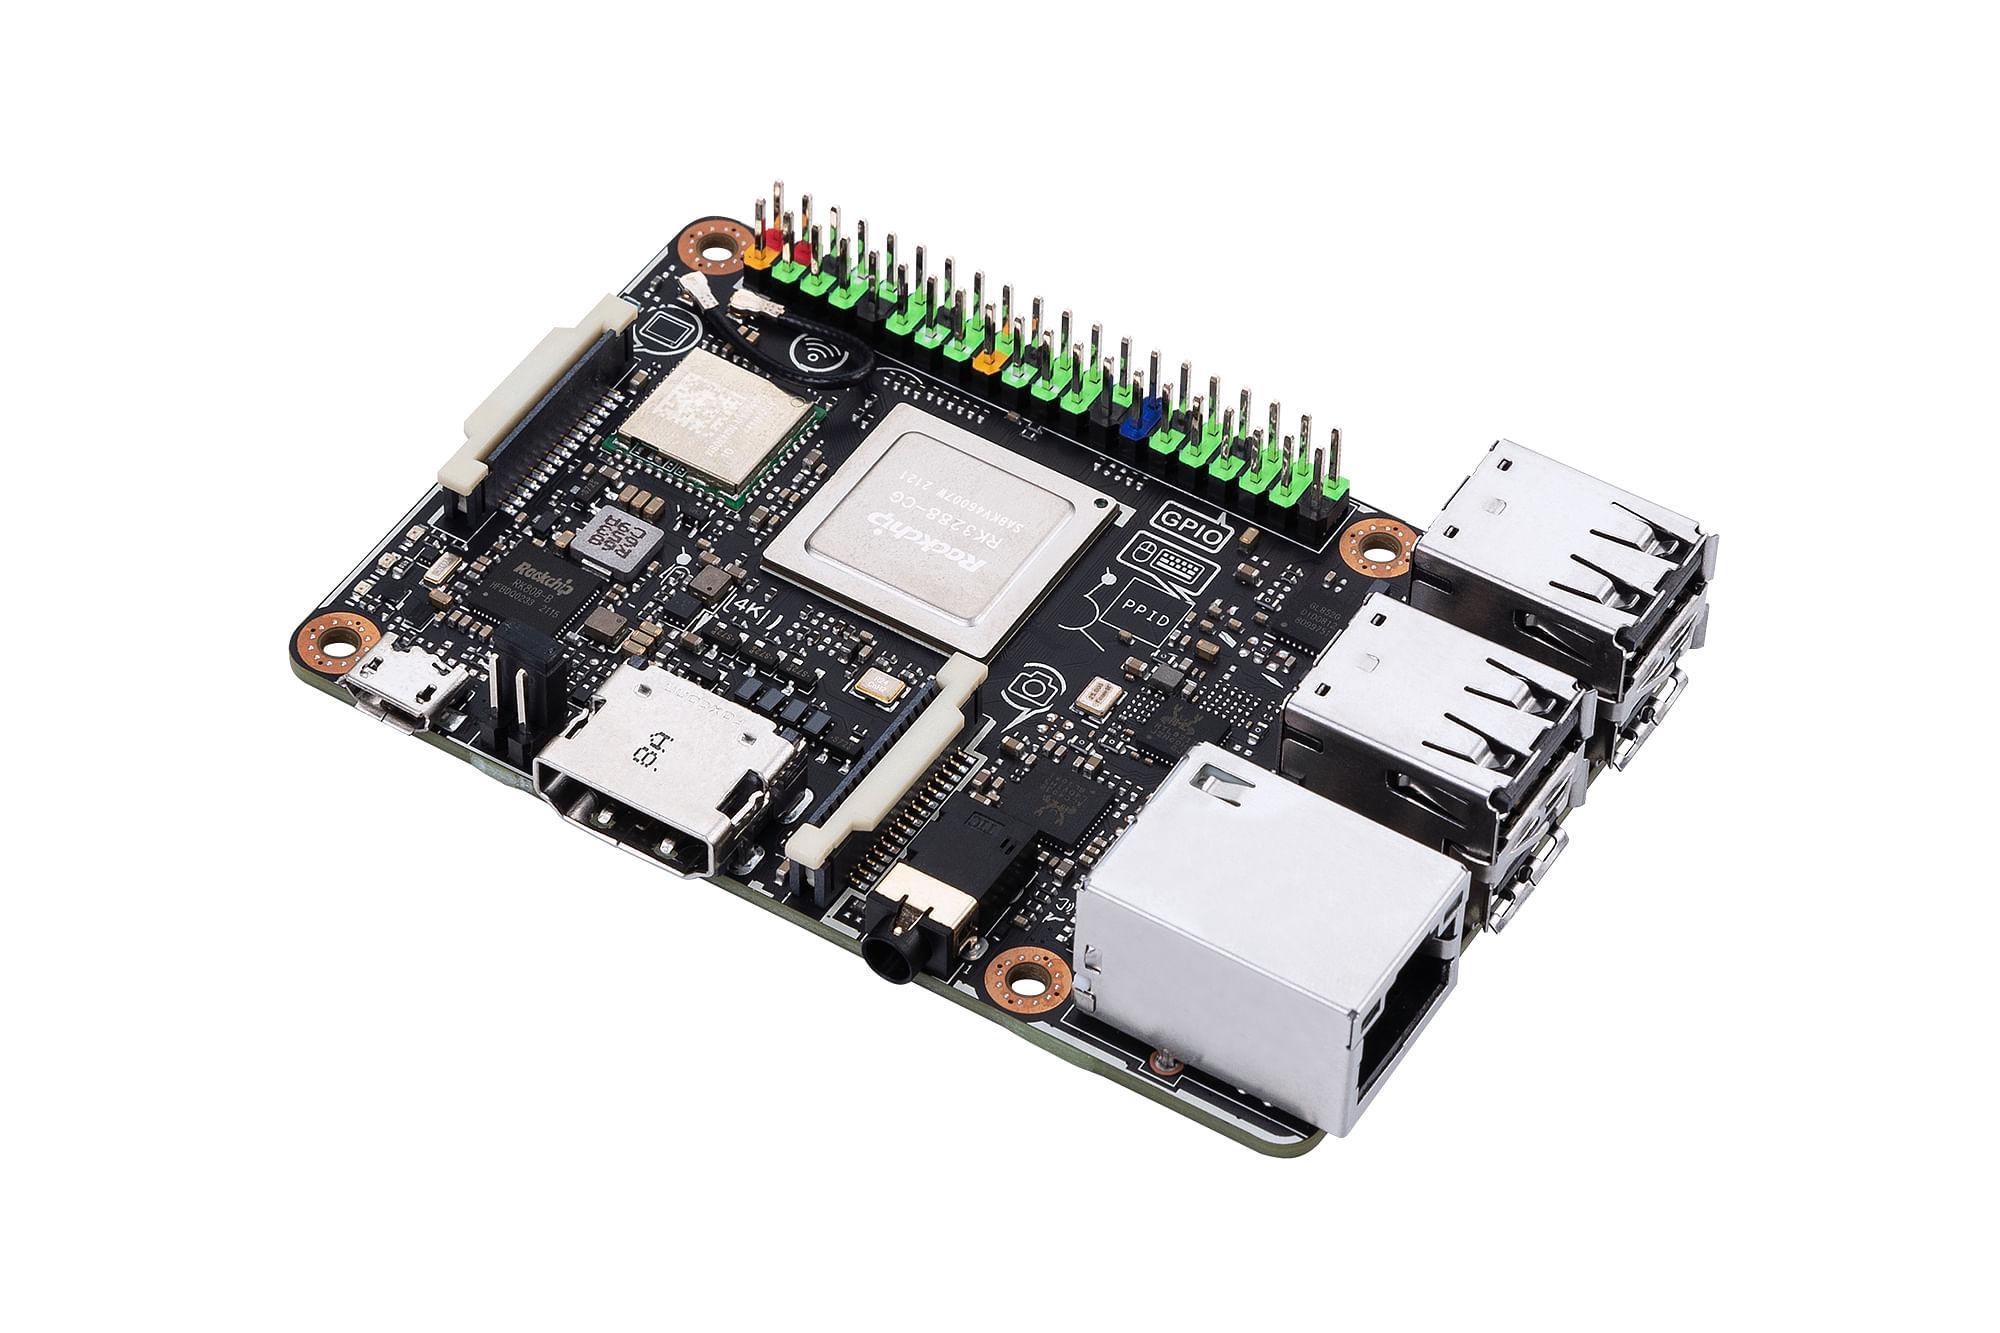 Asus Tinker Board S Revision 2.0, 2GB RAM, 16GB Storage [TINKER-BOARD-S-R2.0-A-2G-16G]